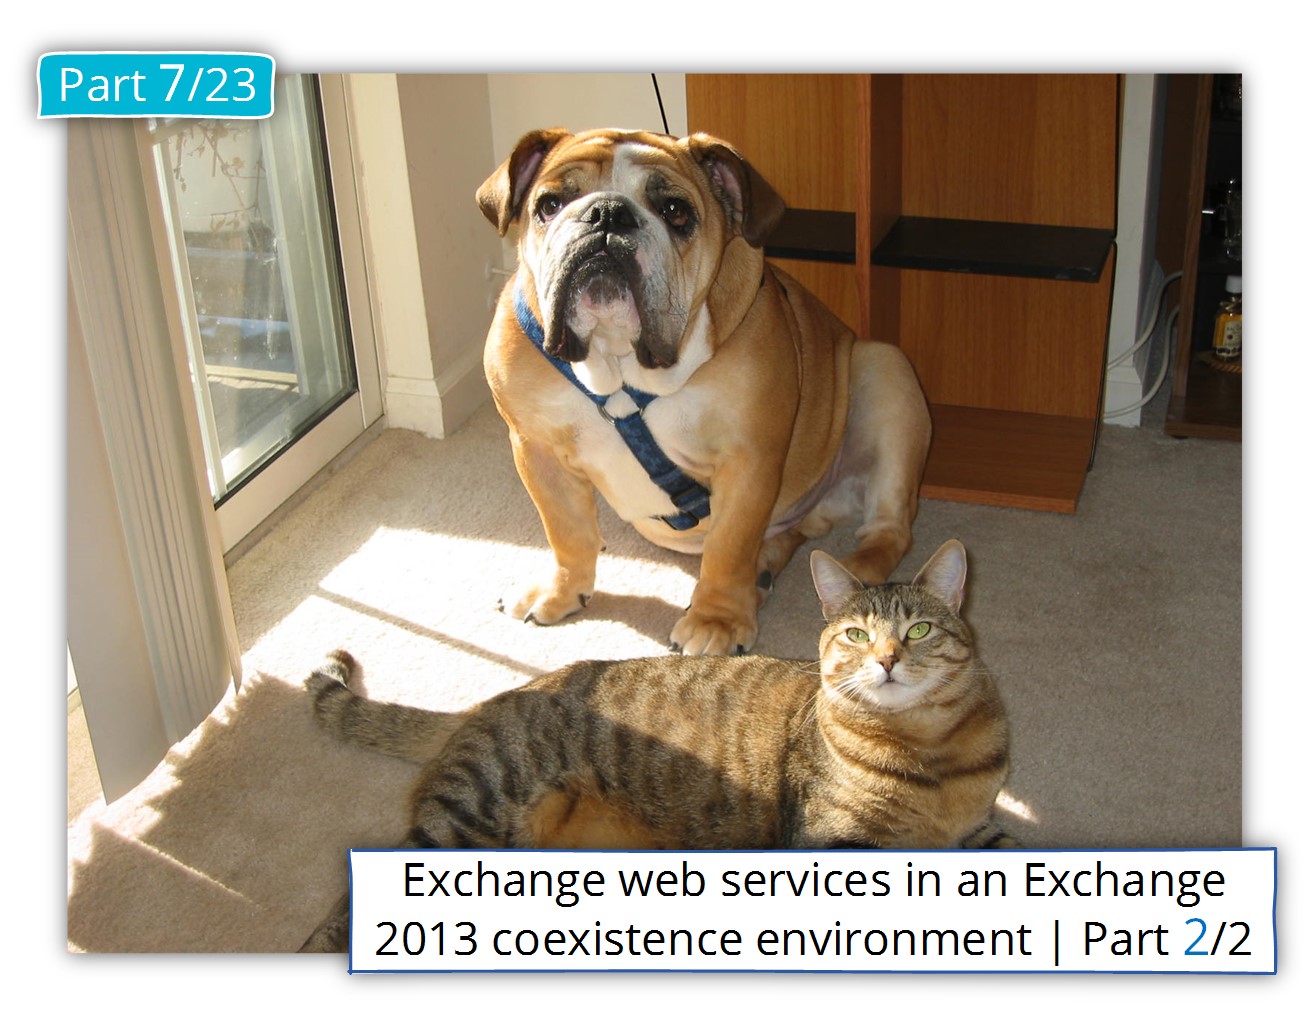 Exchange web services in an Exchange 2013 coexistence environment | Part 2/2